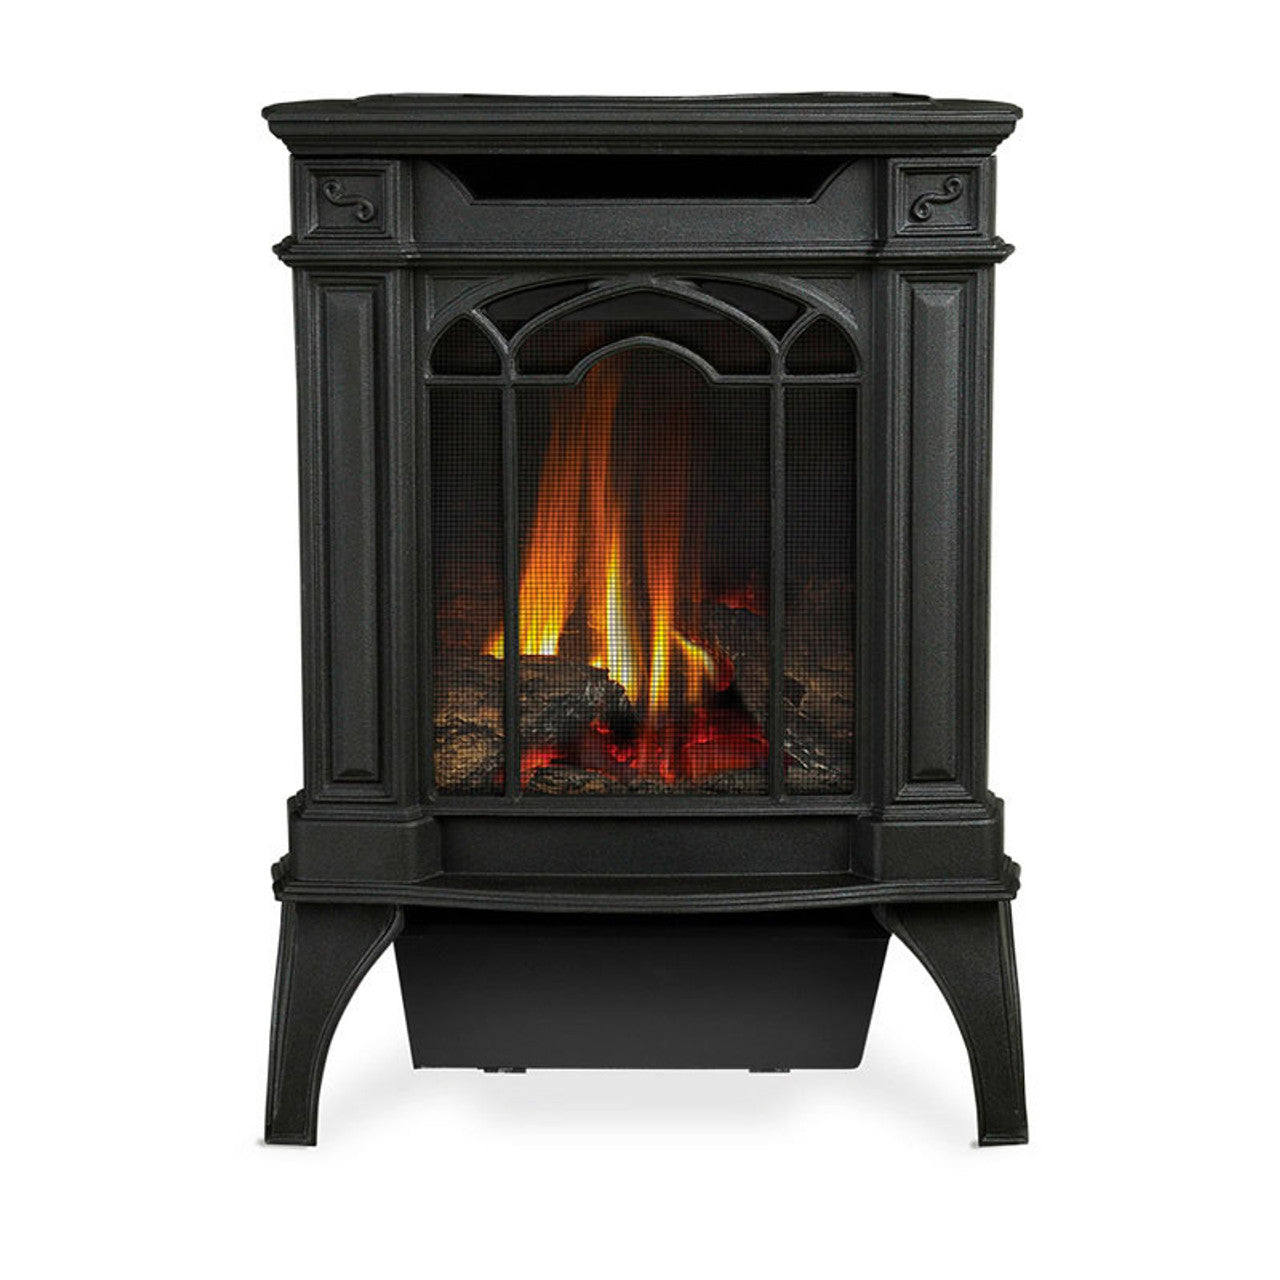 Timberwolf TDS20N 20 Reversible Vented Natural Gas Stove - TDS20N - Chimney Cricket